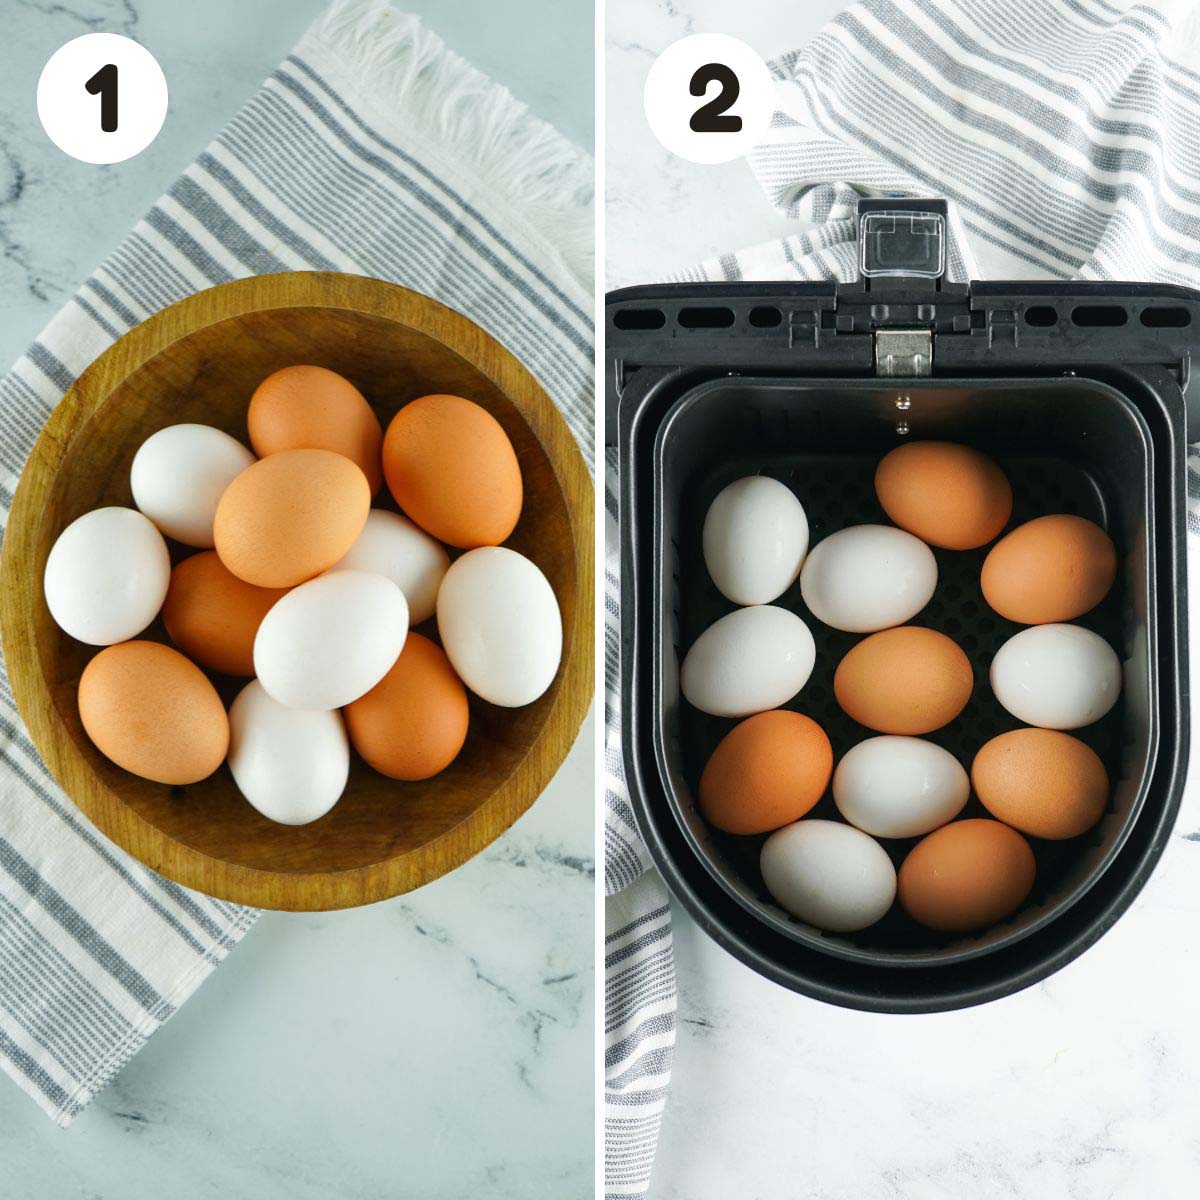 Steps to make the boiled eggs.